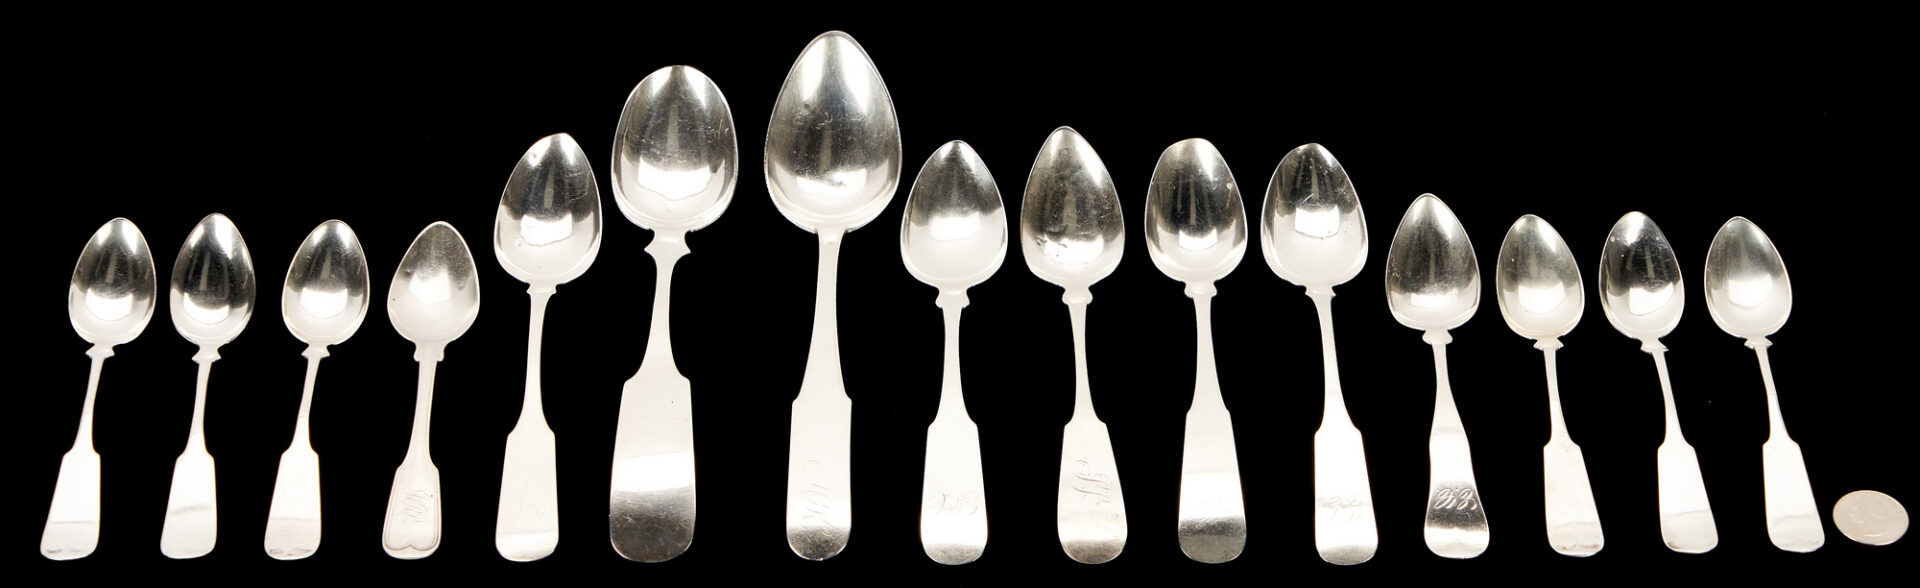 Lot 88: 15 Coin Silver & Sterling Spoons, incl. Asa Blanchard, Kentucky